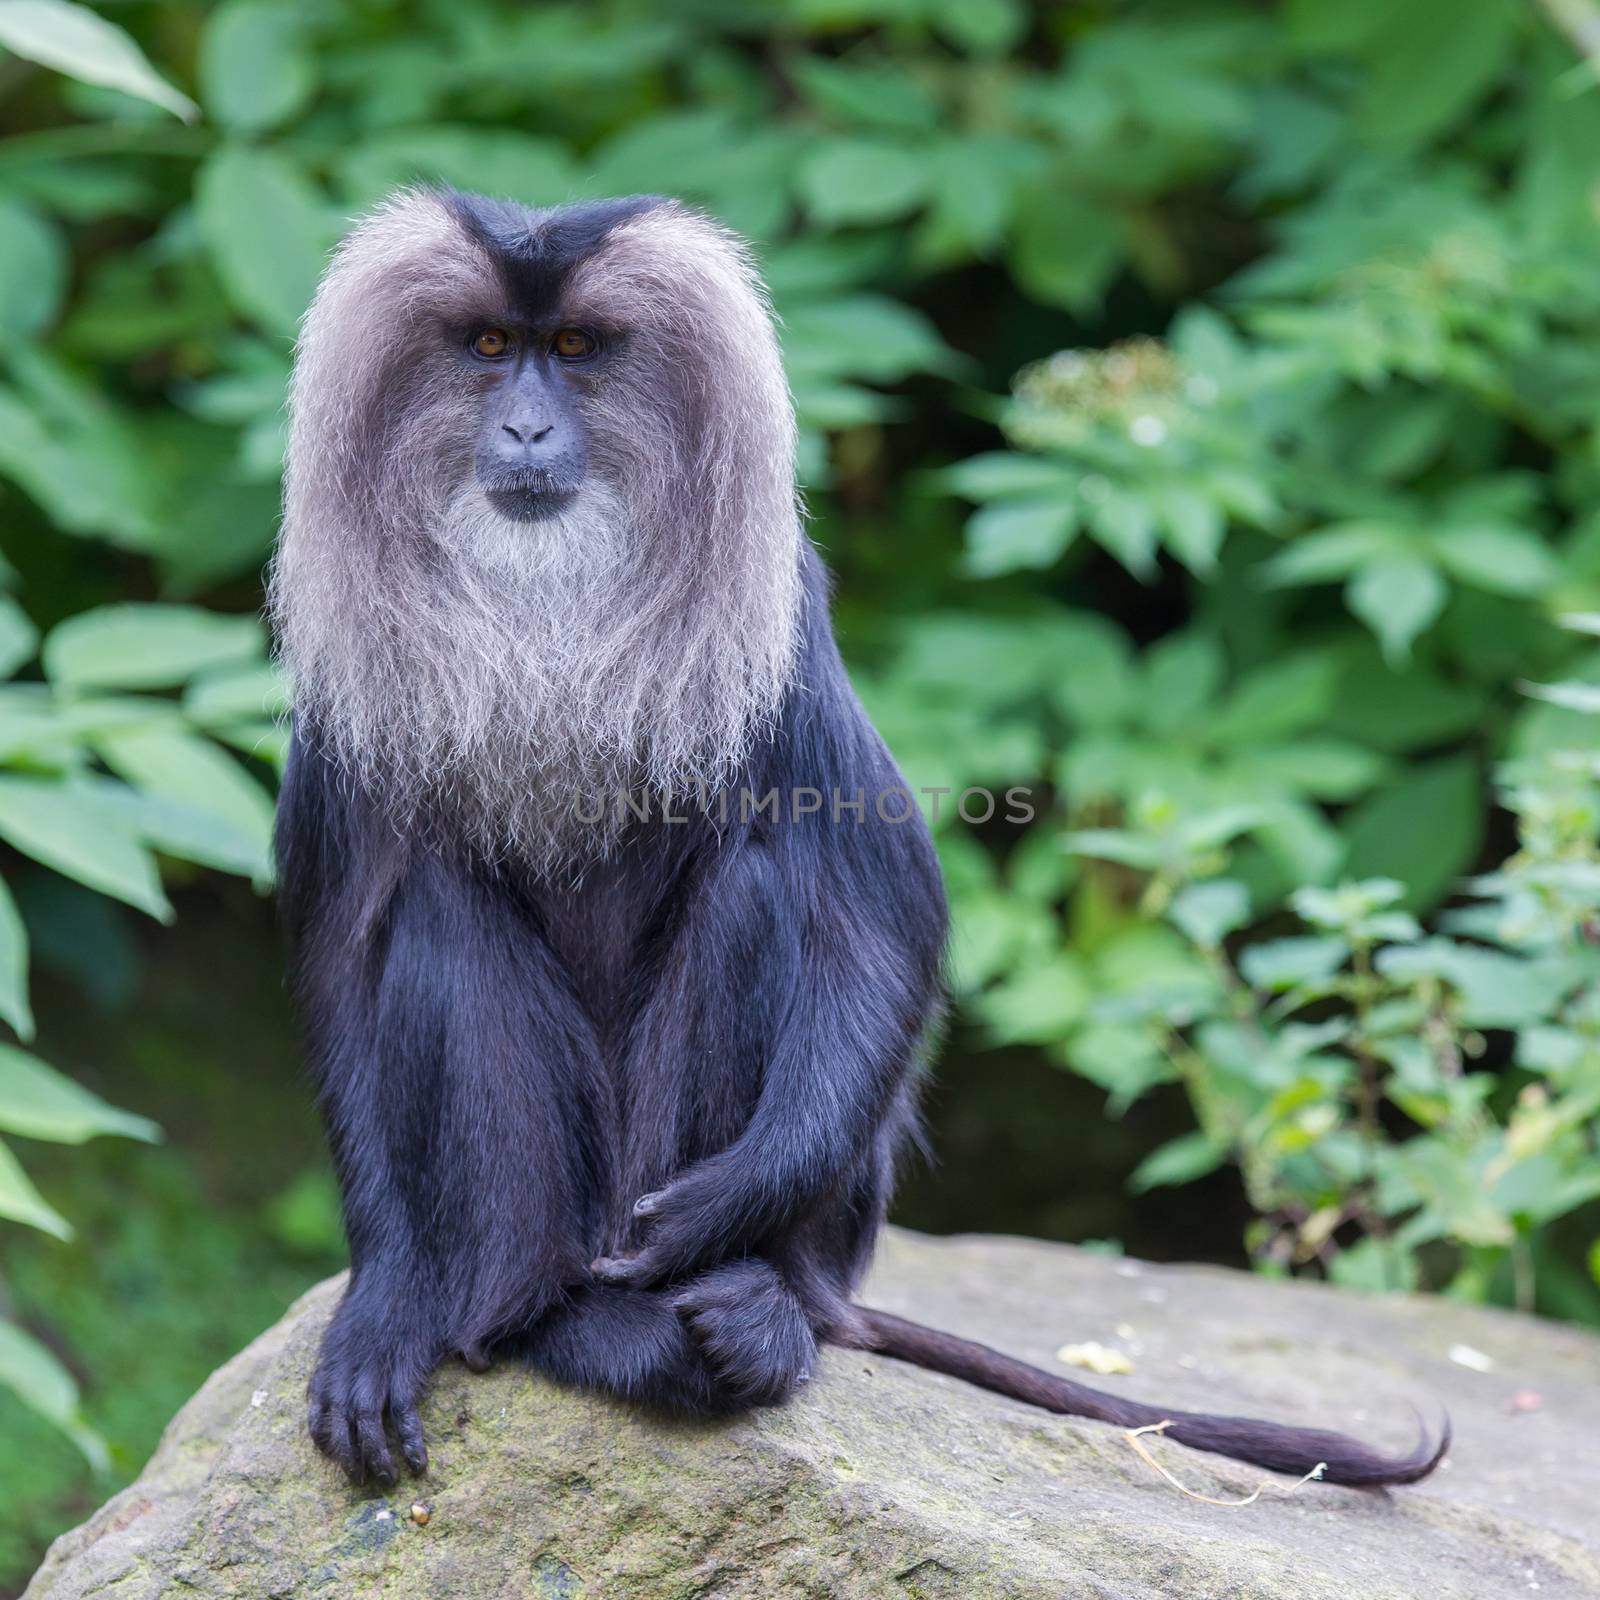 Lion-tailed Macaque (Macaca silenus) in it's natural habitat